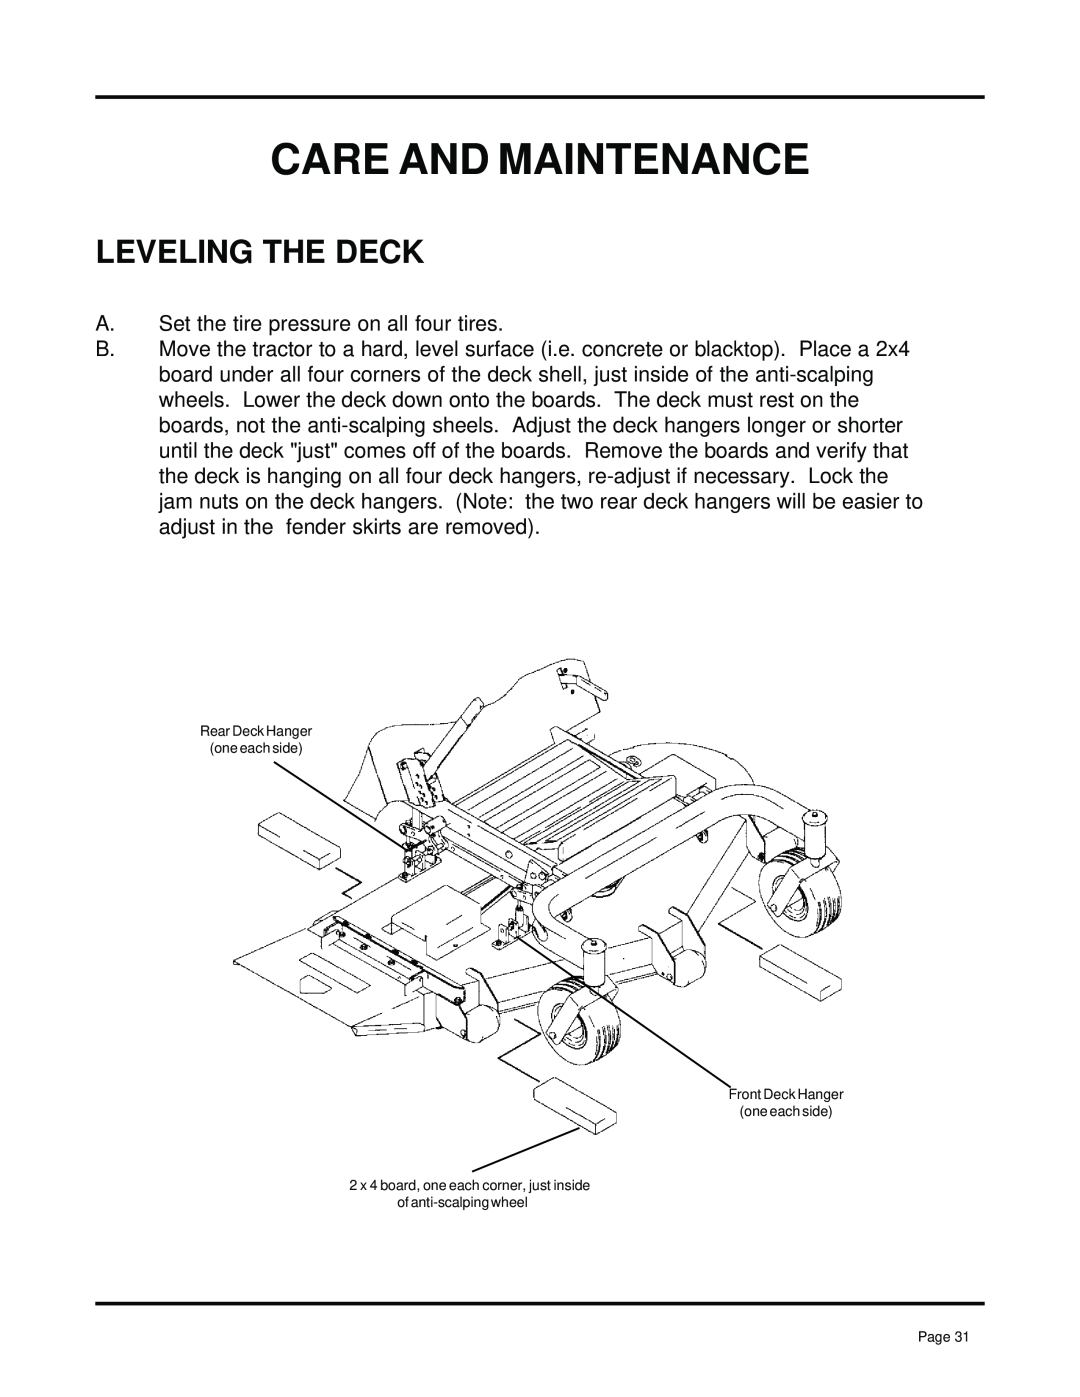 Dixon 13091-0500, ZTR 7025 manual Leveling The Deck, Care And Maintenance 